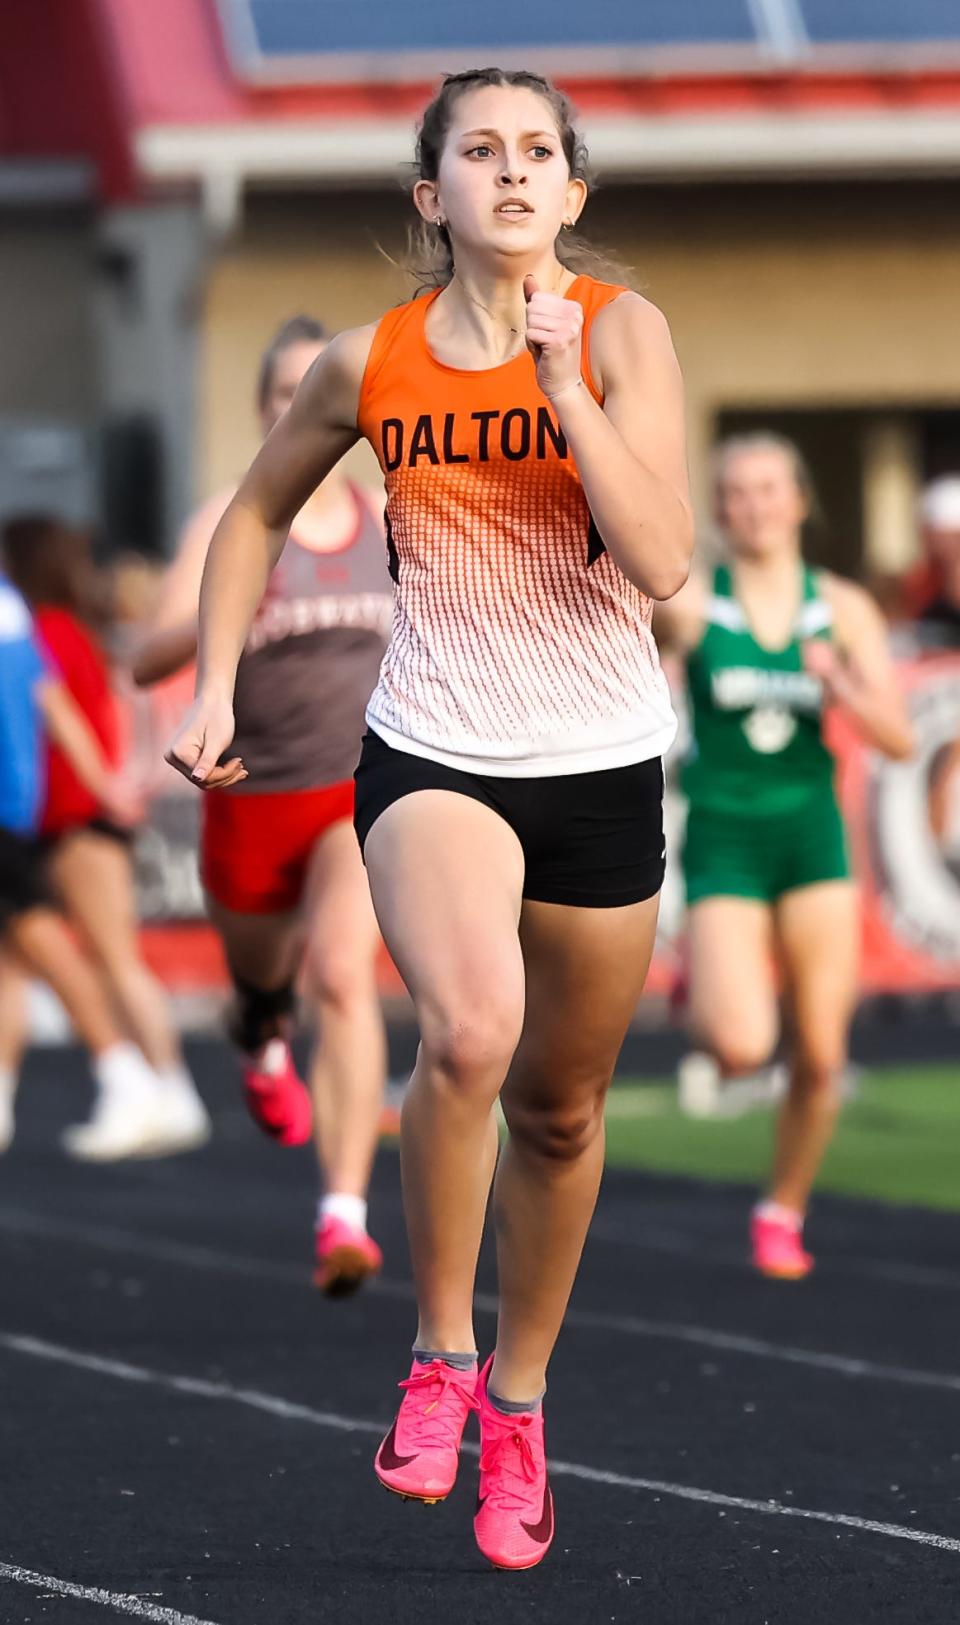 Dalton's Brianna Chenevey won the 400-meter dash running away with a time of 57.17.